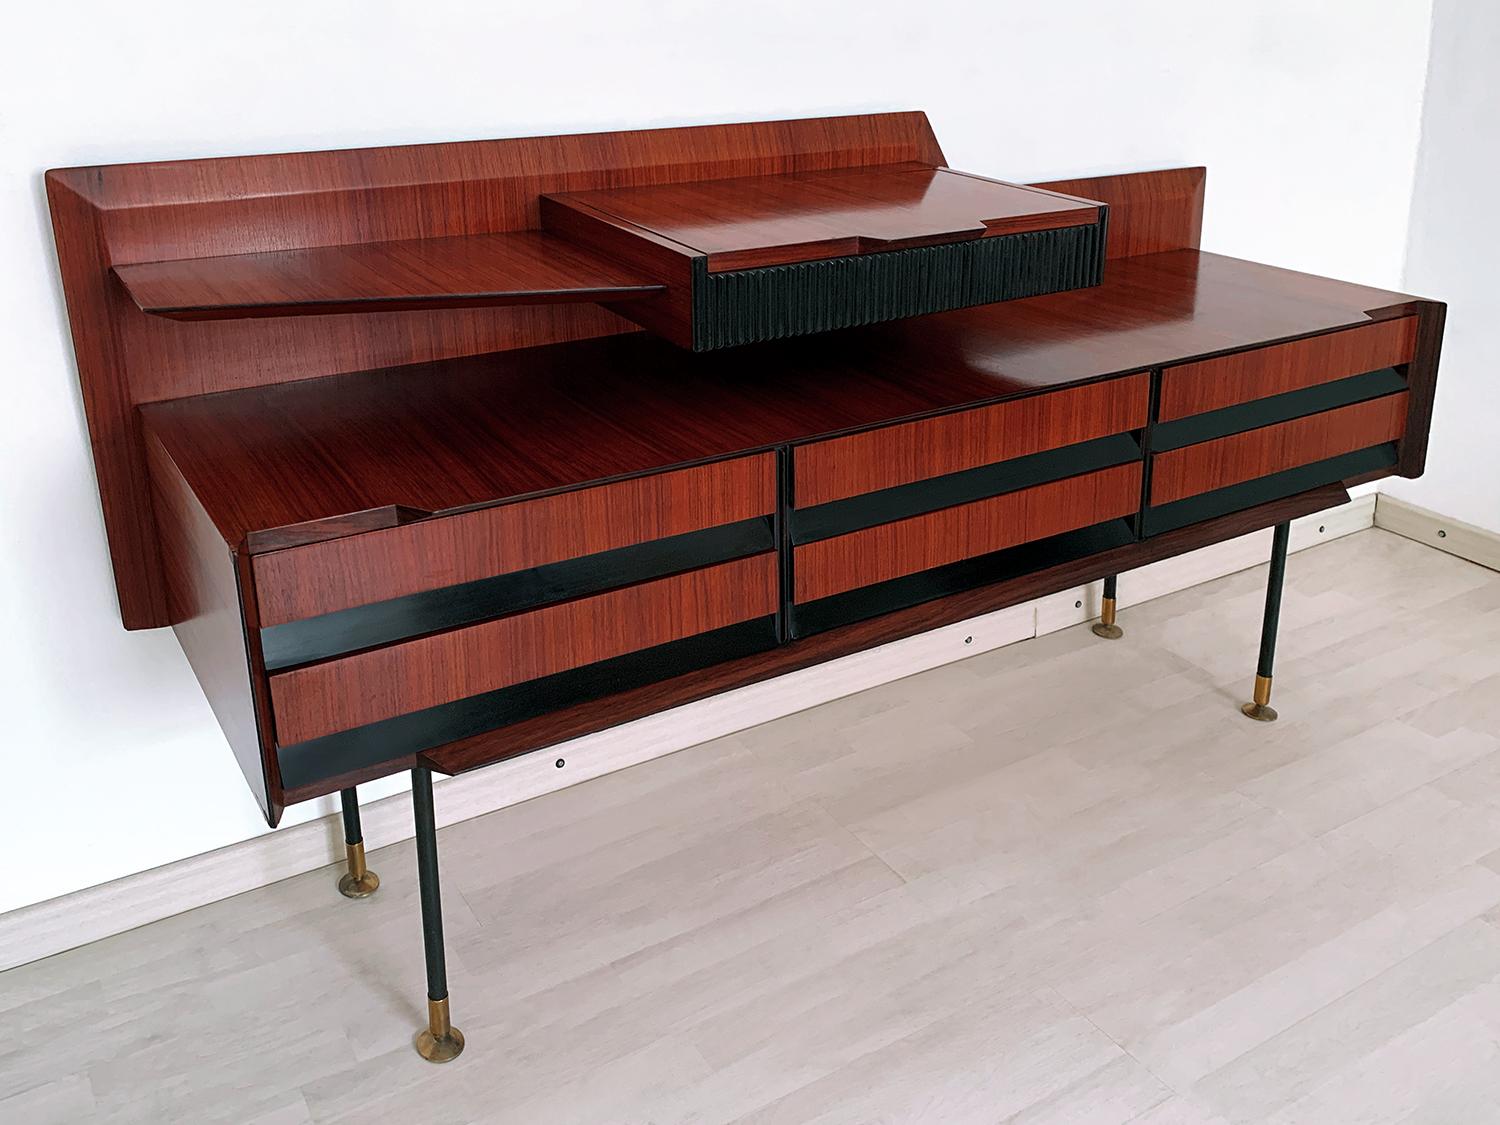 Italian Mid-Century Teak Wood Sideboard with Drawers by Vittorio Dassi, 1950s 9